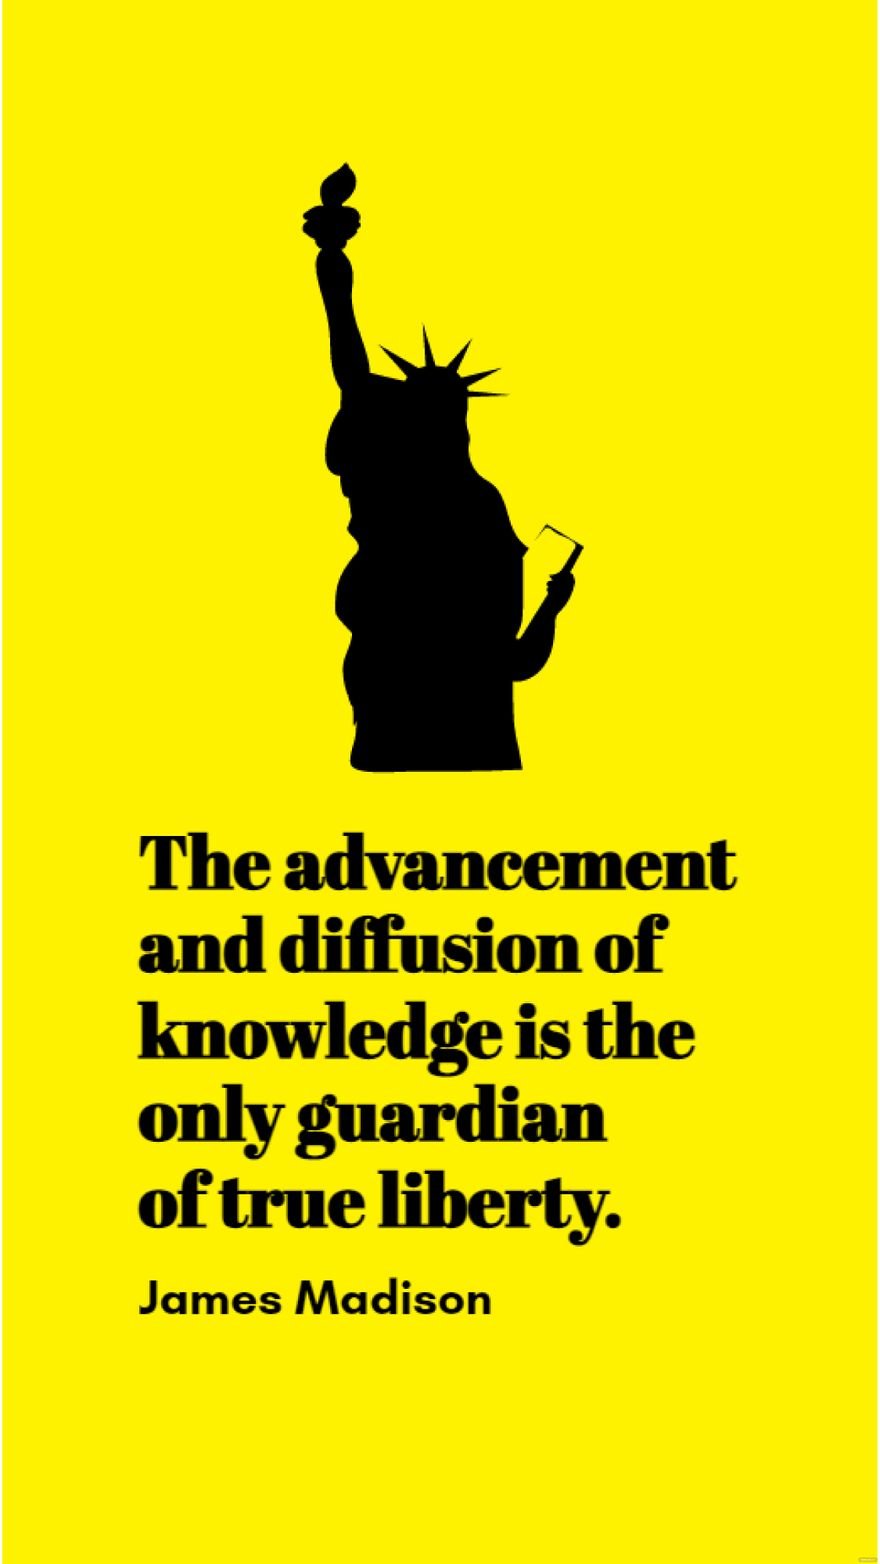 James Madison - The advancement and diffusion of knowledge is the only guardian of true liberty.